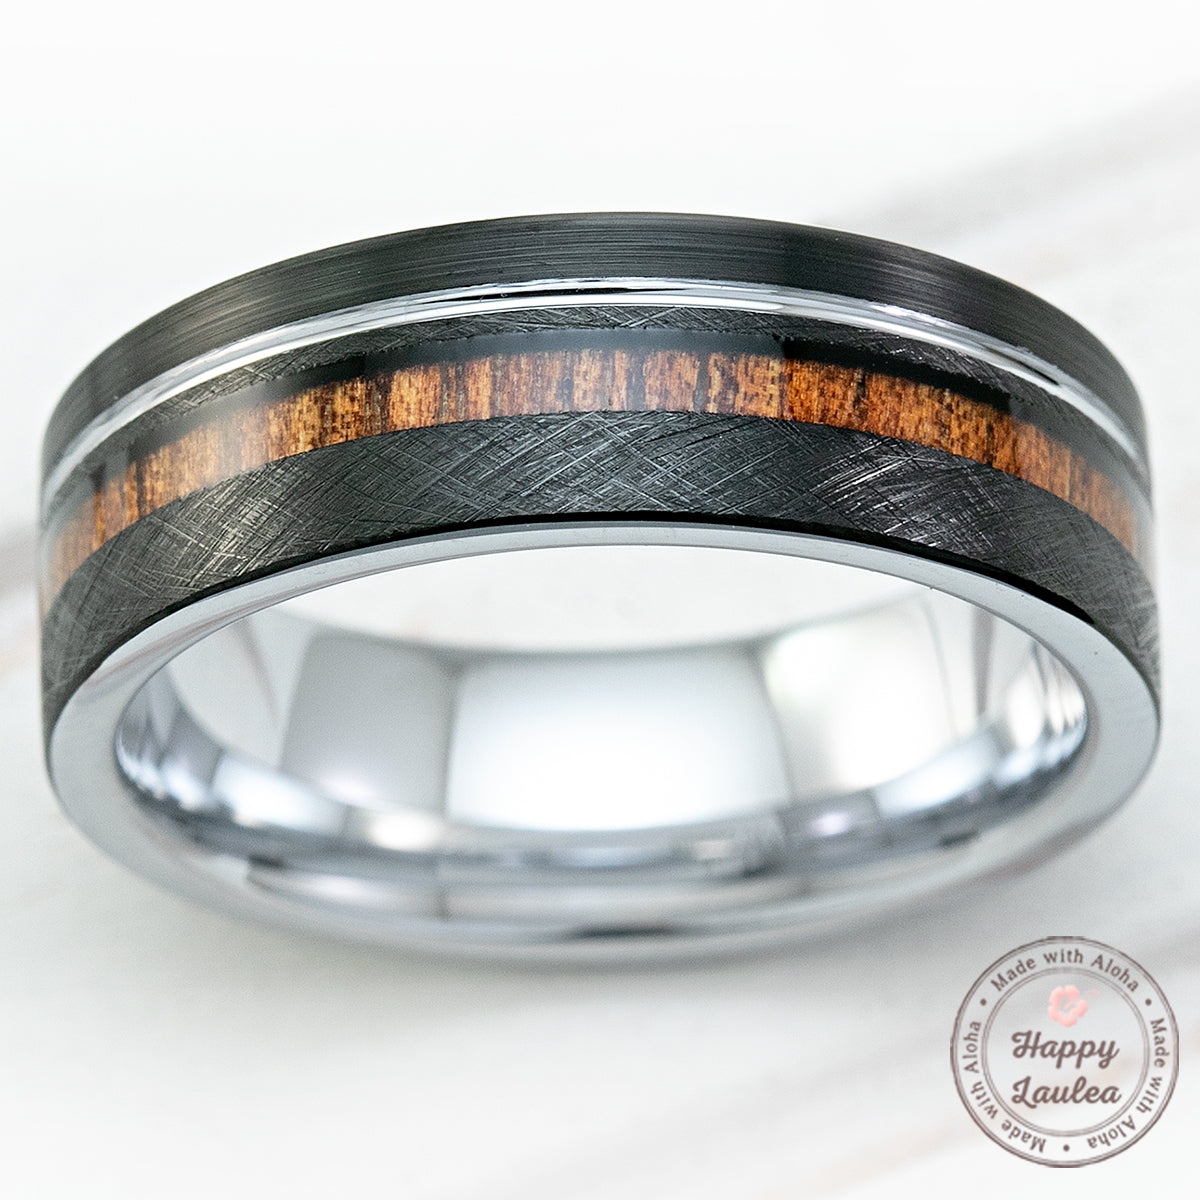 Black & White Gold Tungsten Carbide Ring with Offset strip and Koa Wood Inlay -7.5mm Flat Shape, Comfort Fitment